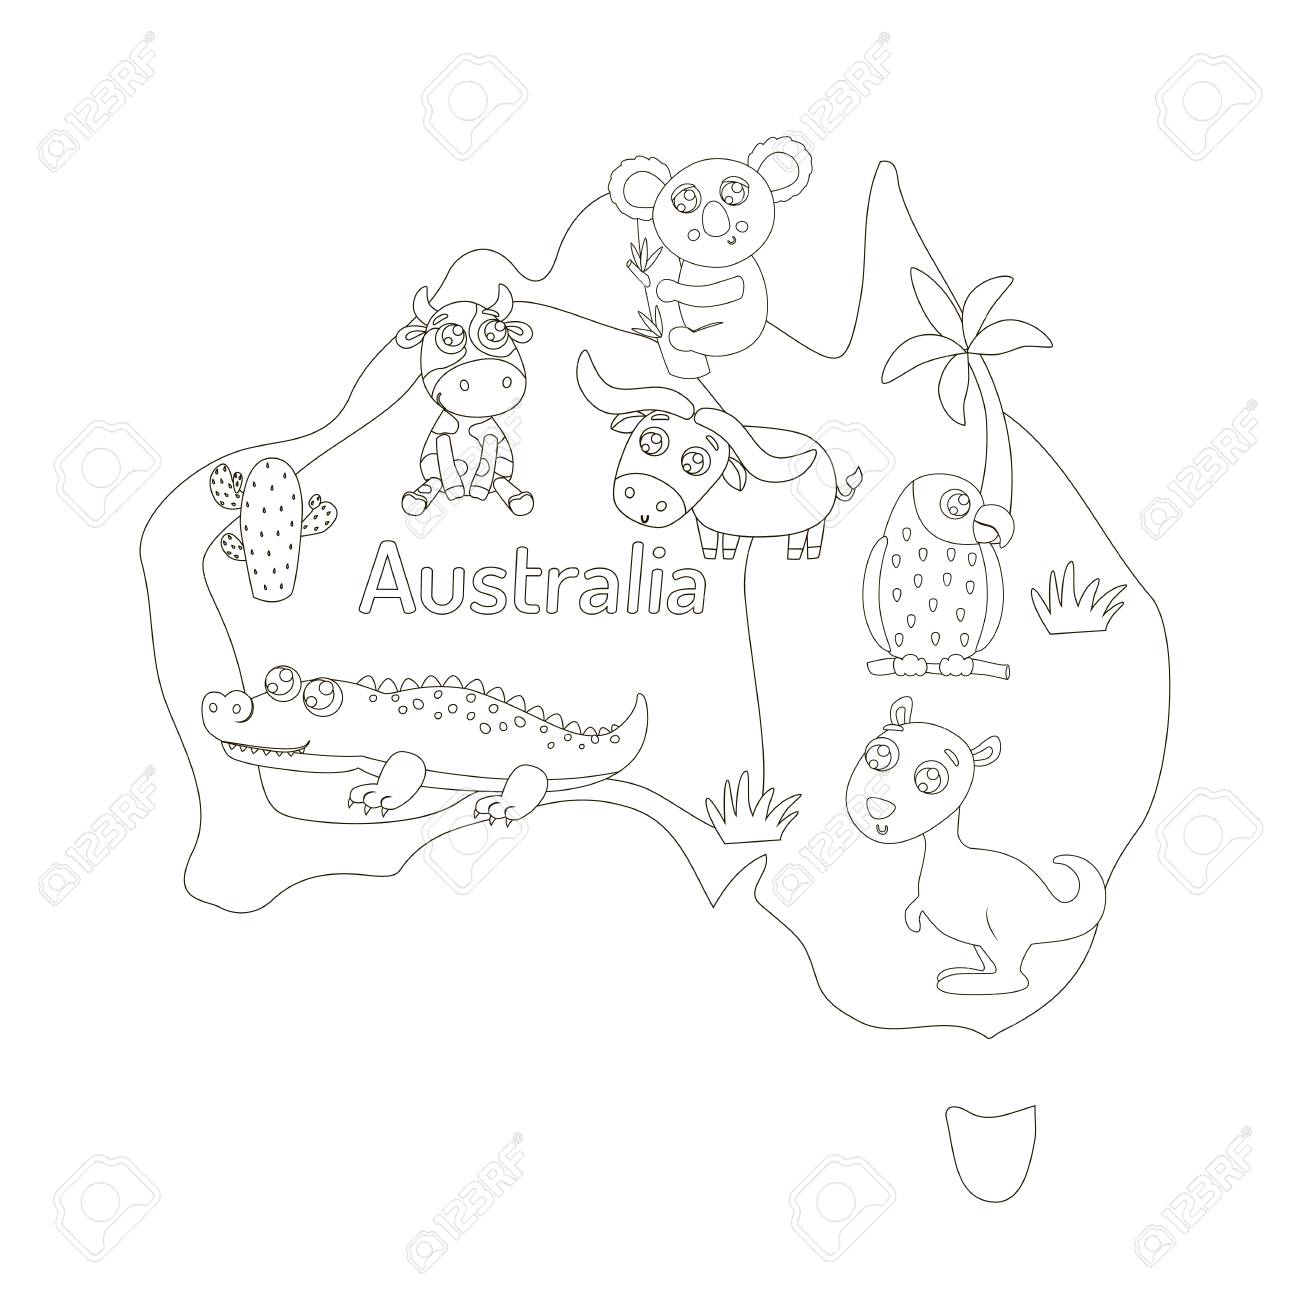 Coloring page with animal map of australia for kids royalty free svg cliparts vectors and stock illustration image